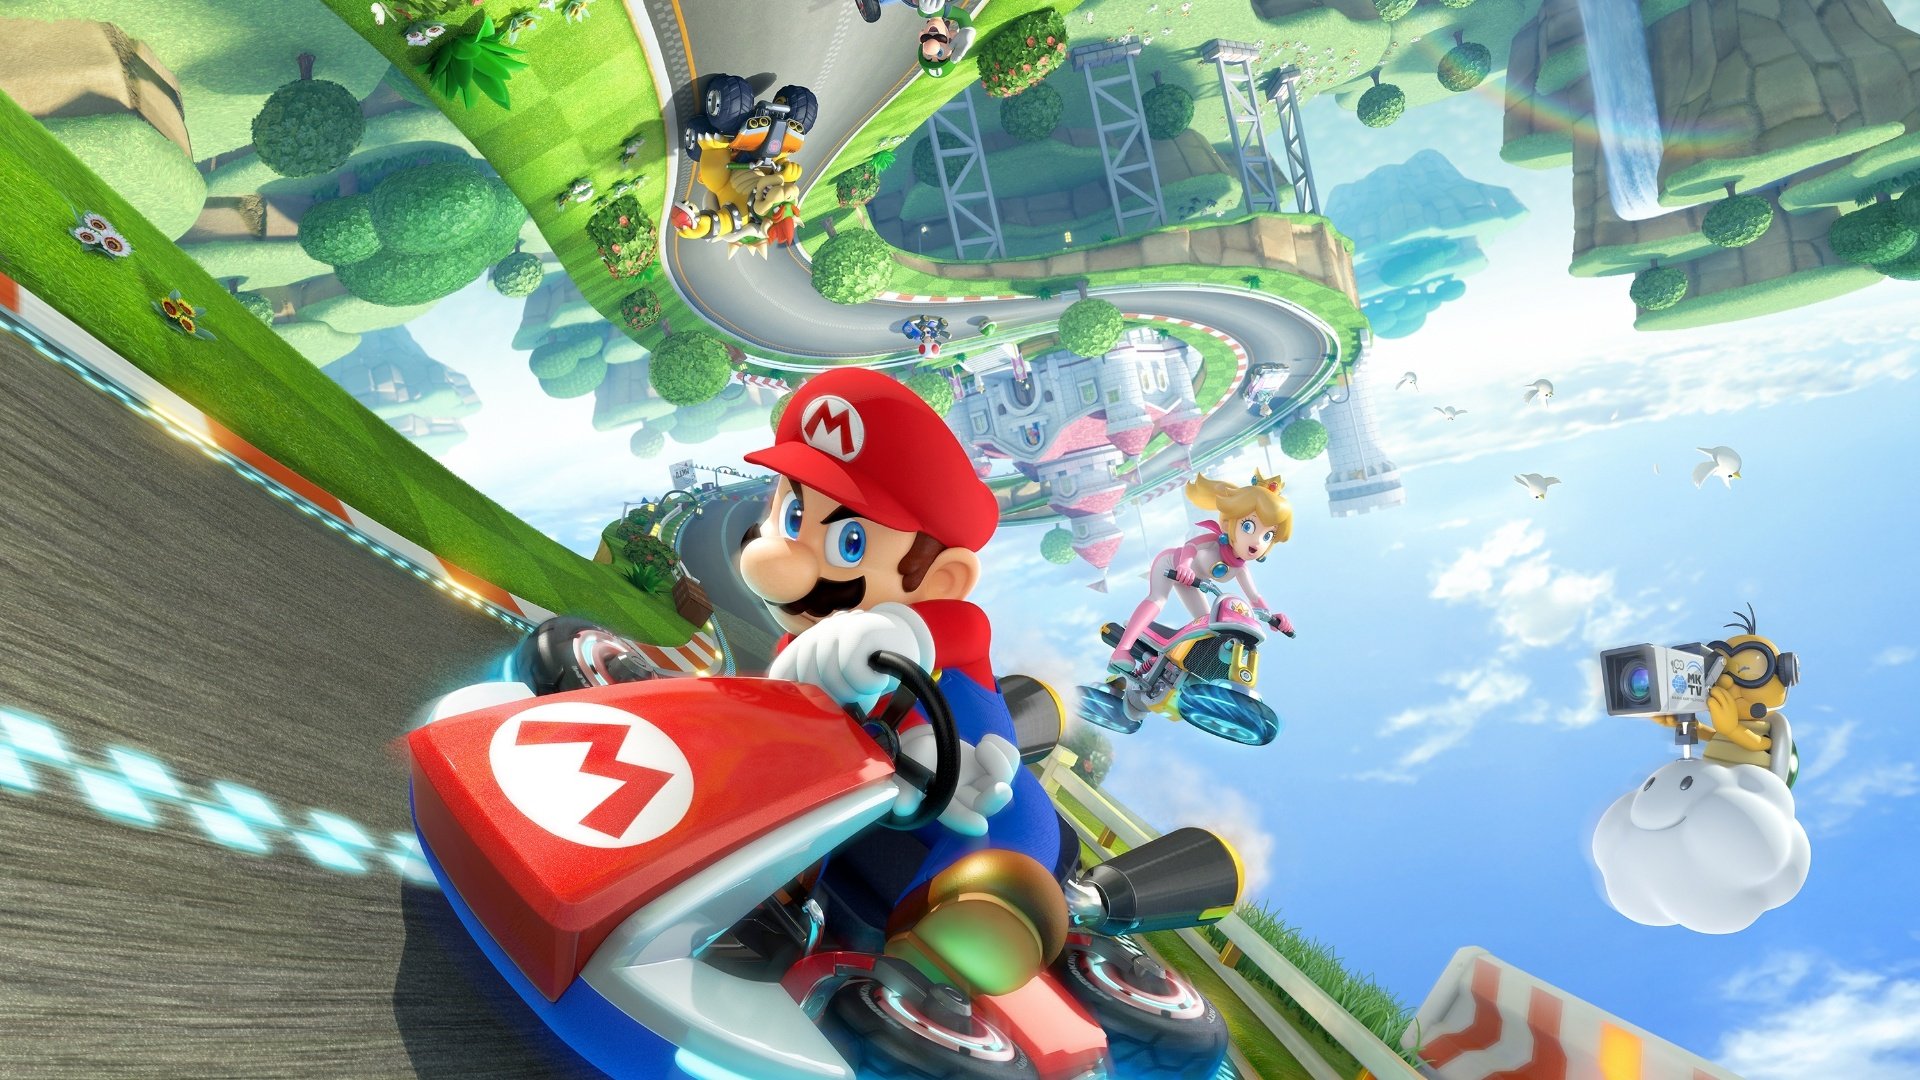 “Mario Kart 8” - Fuel Up and Enjoy the Ride